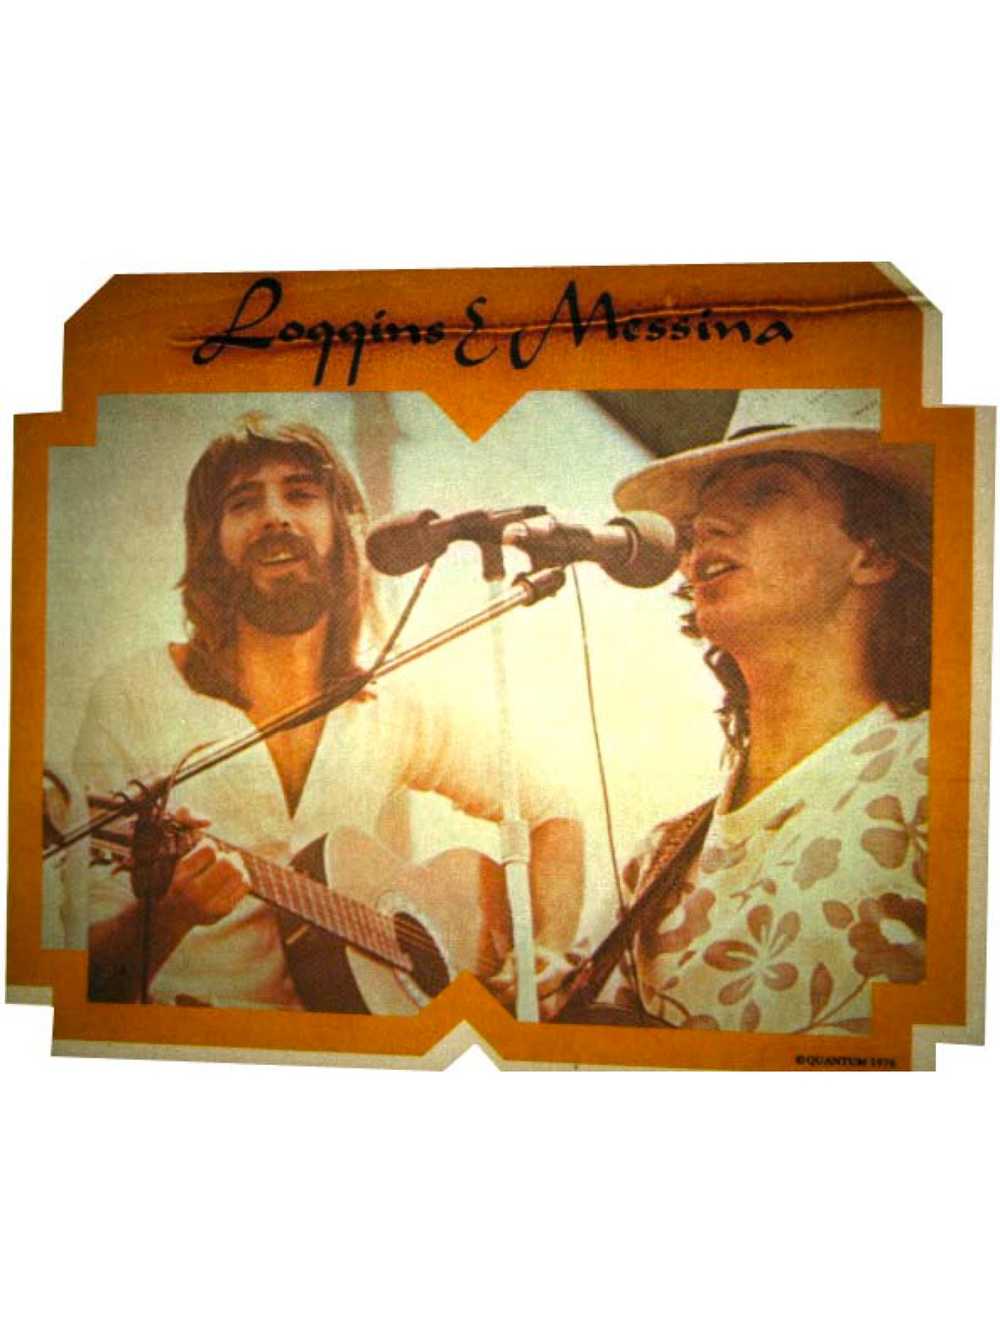 1970's Loggins and Messina Iron-Ons - Music Themes - image 1